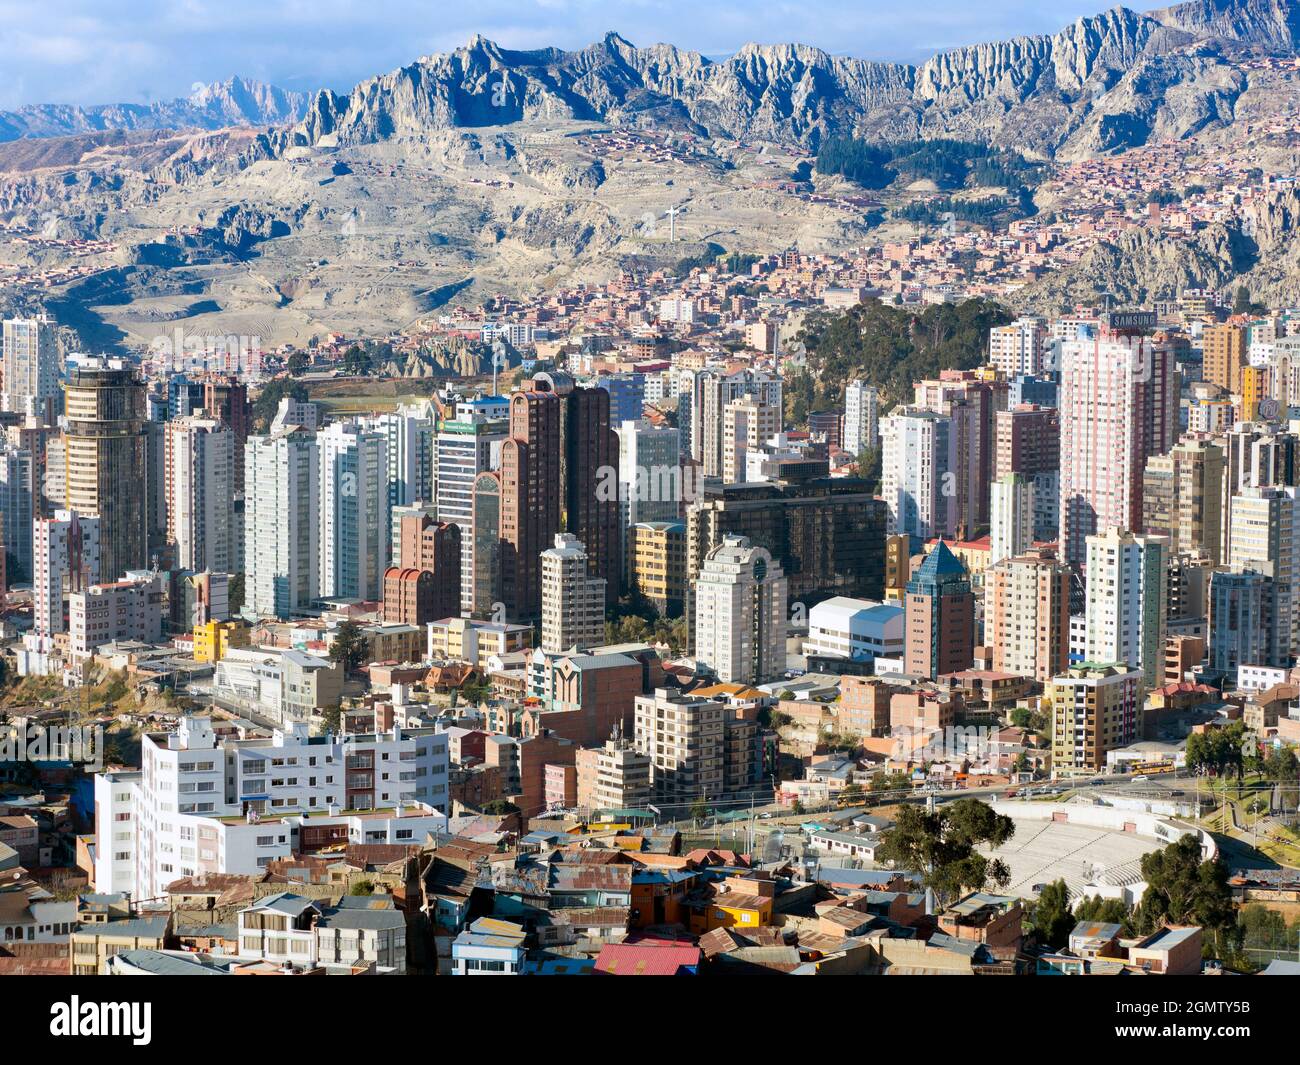 La Paz, Bolivia - 19/20 May 2018   At an elevation of roughly 3,650 m (11,975 ft) above sea level, La Paz - the de facto capital of Bolivia - is the h Stock Photo